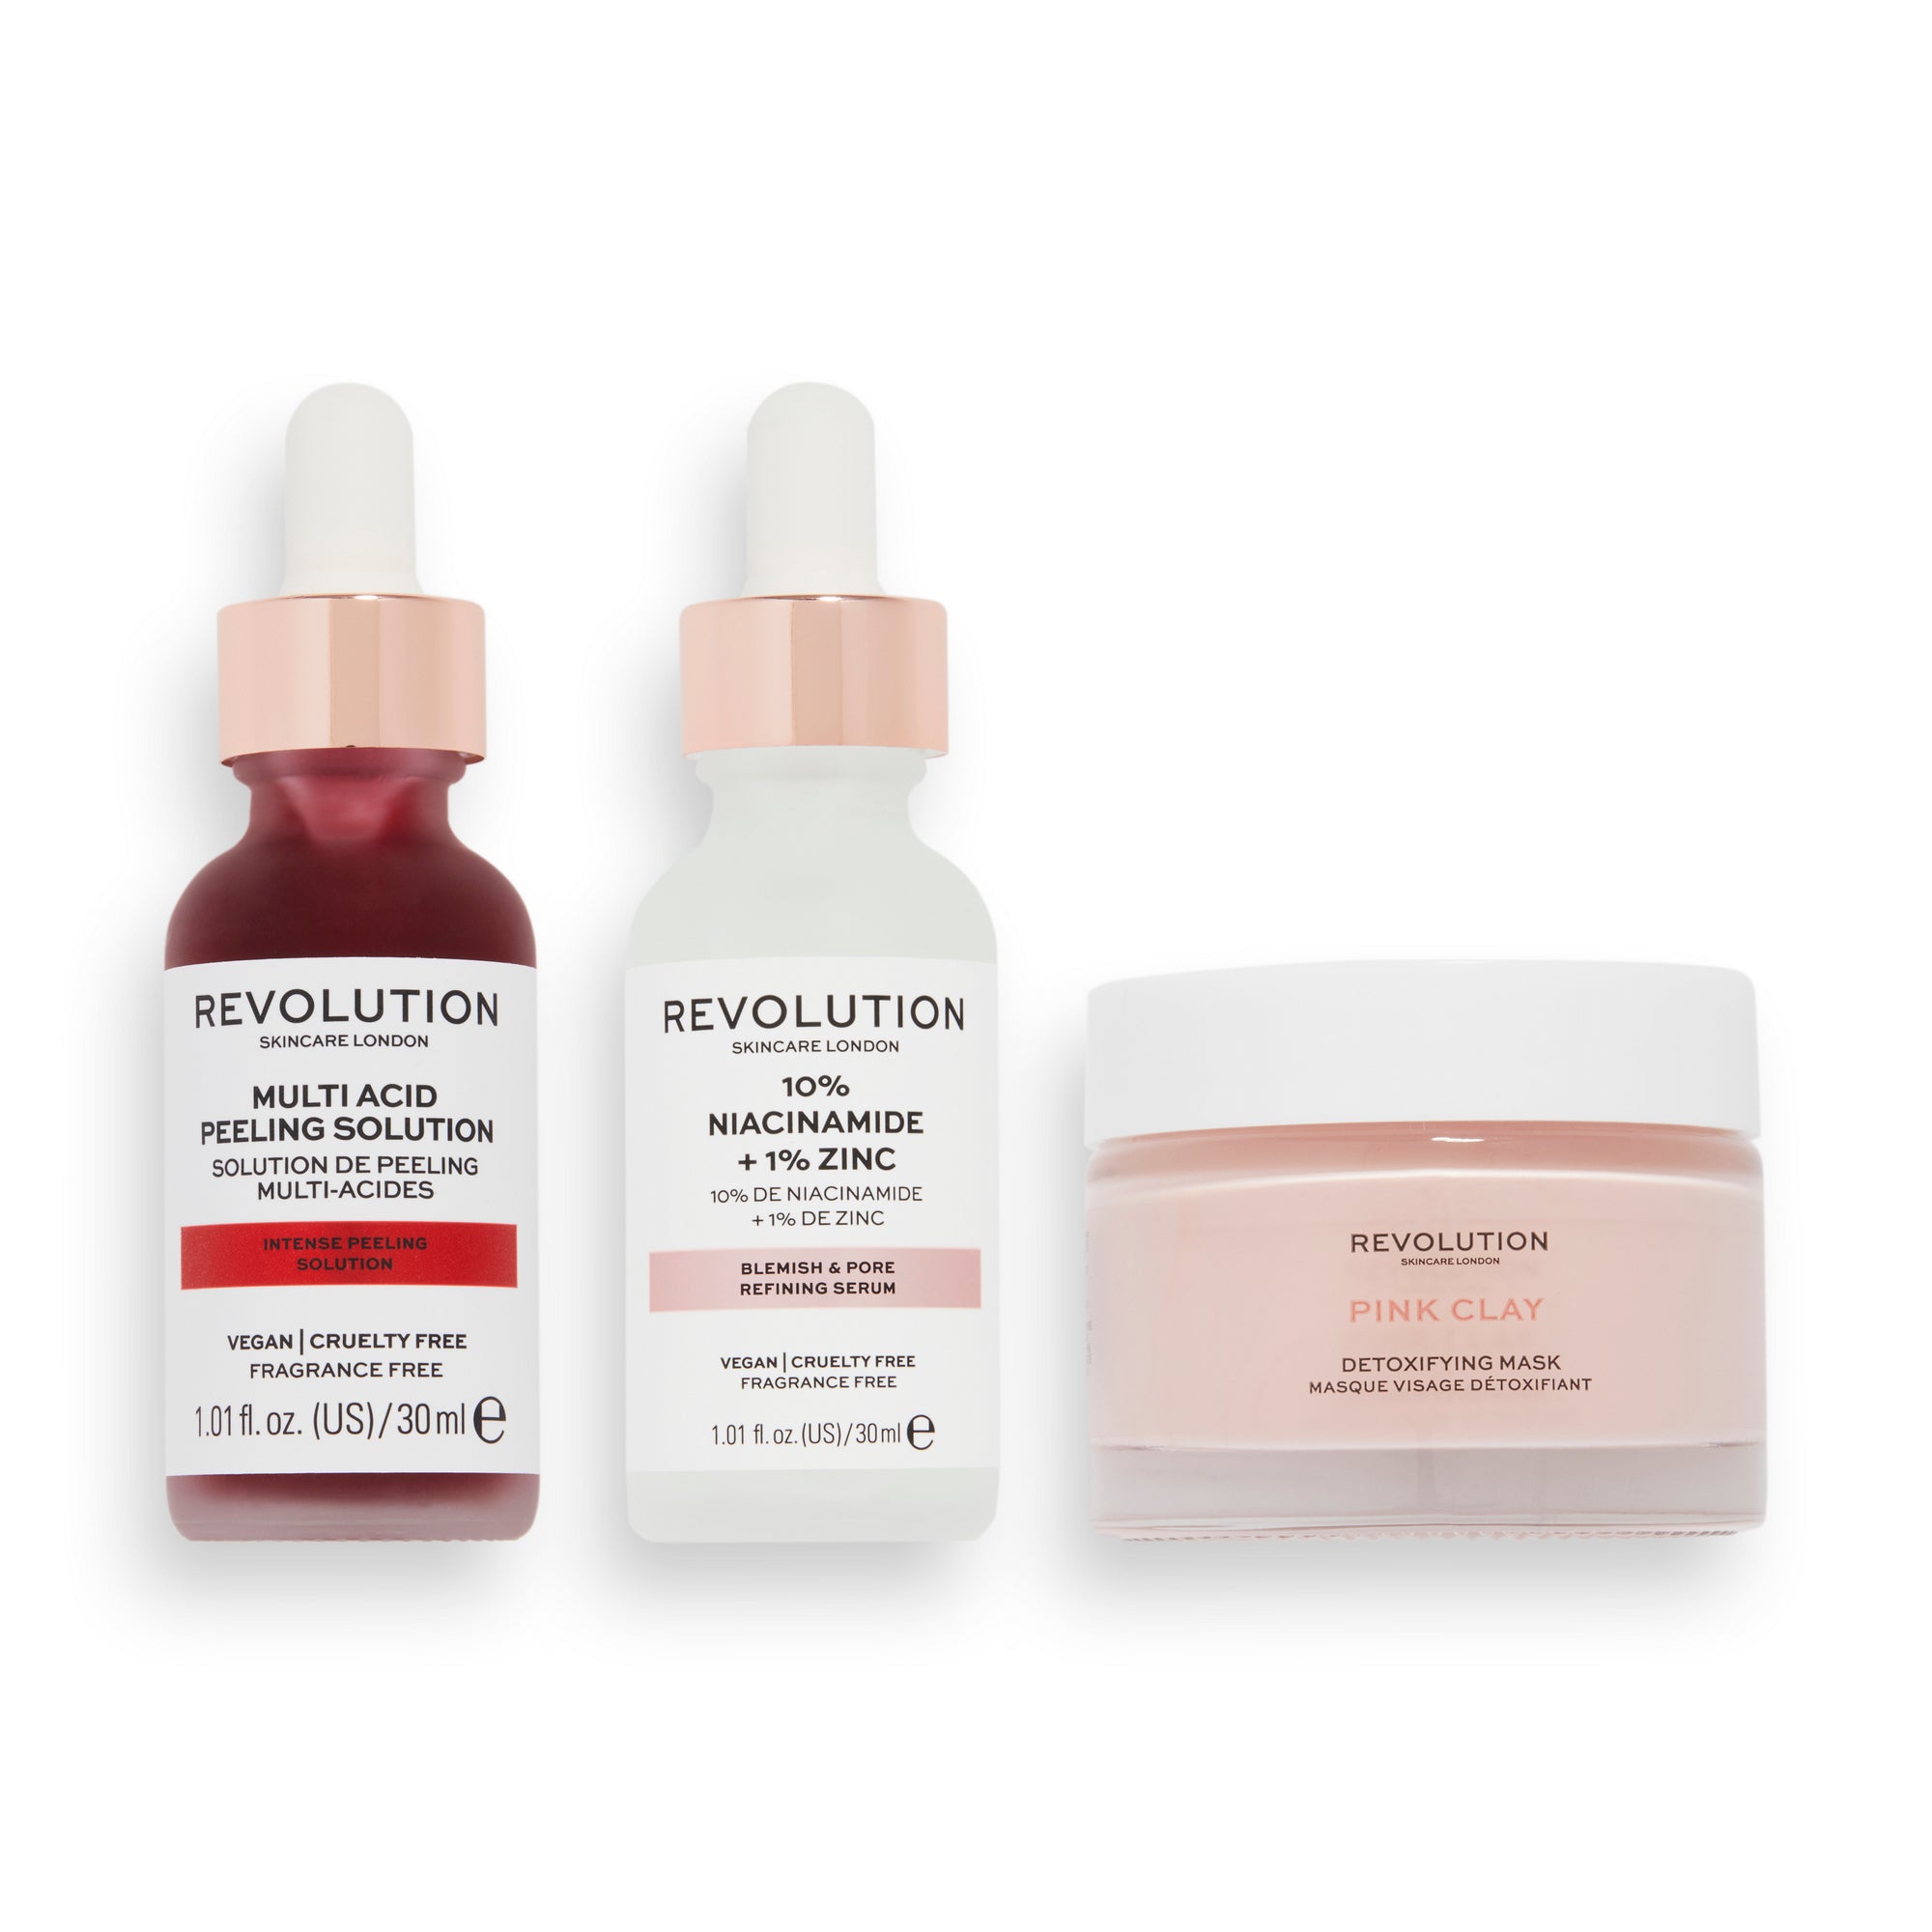 REVOLUTION SKINCARE THE ICONS COLLECTION 3 PIECE SET OPEN